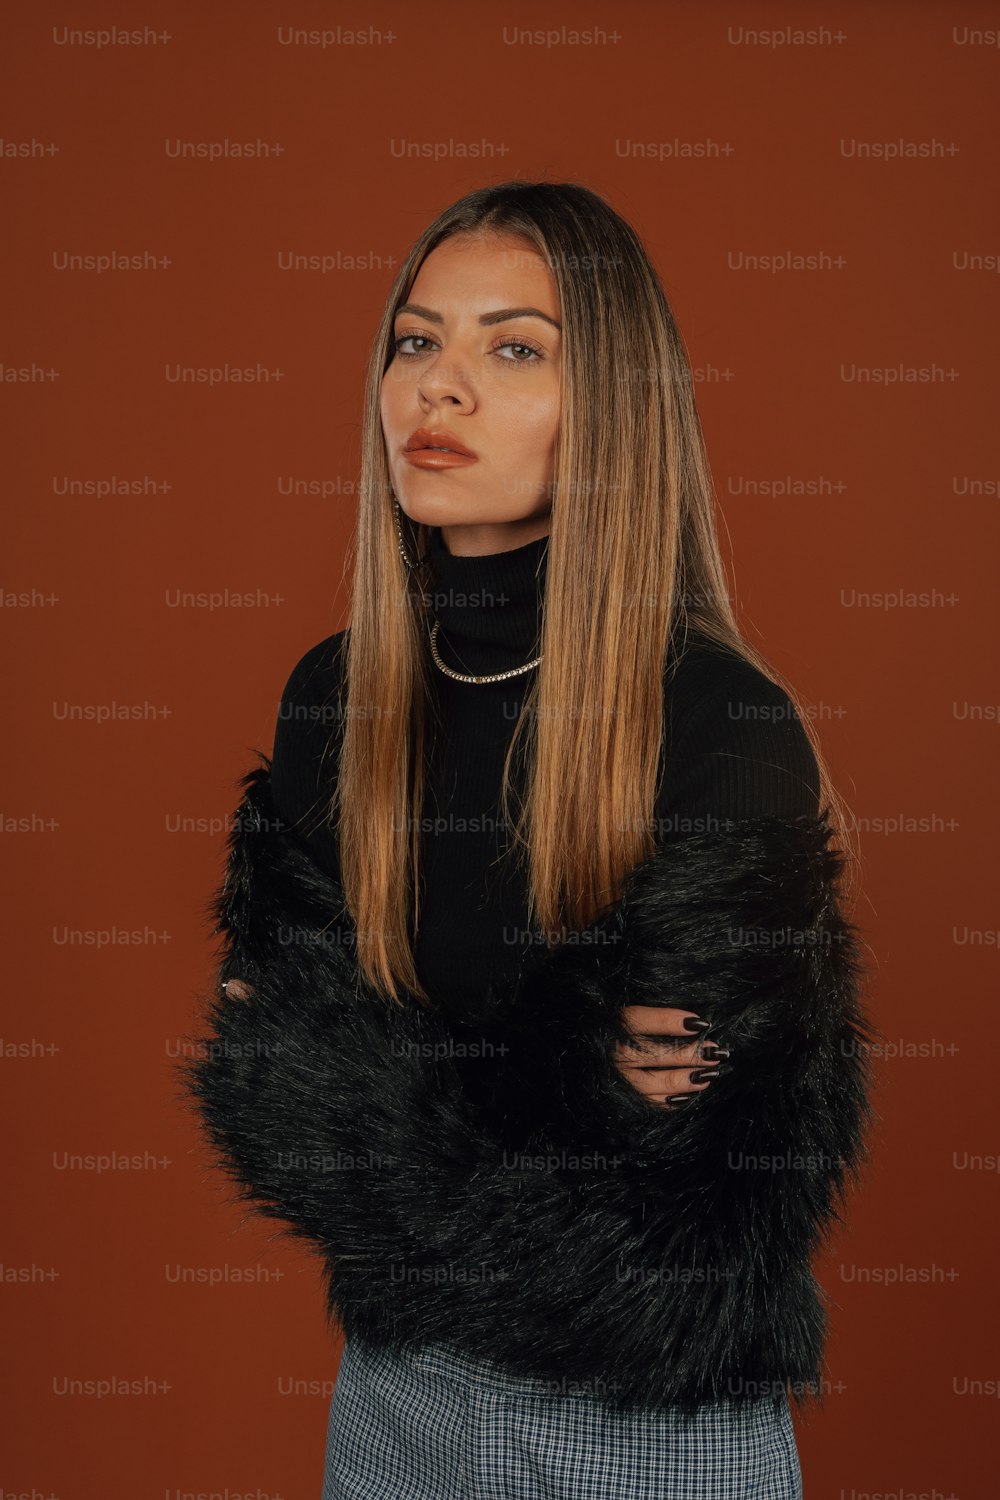 a woman with long hair wearing a black sweater